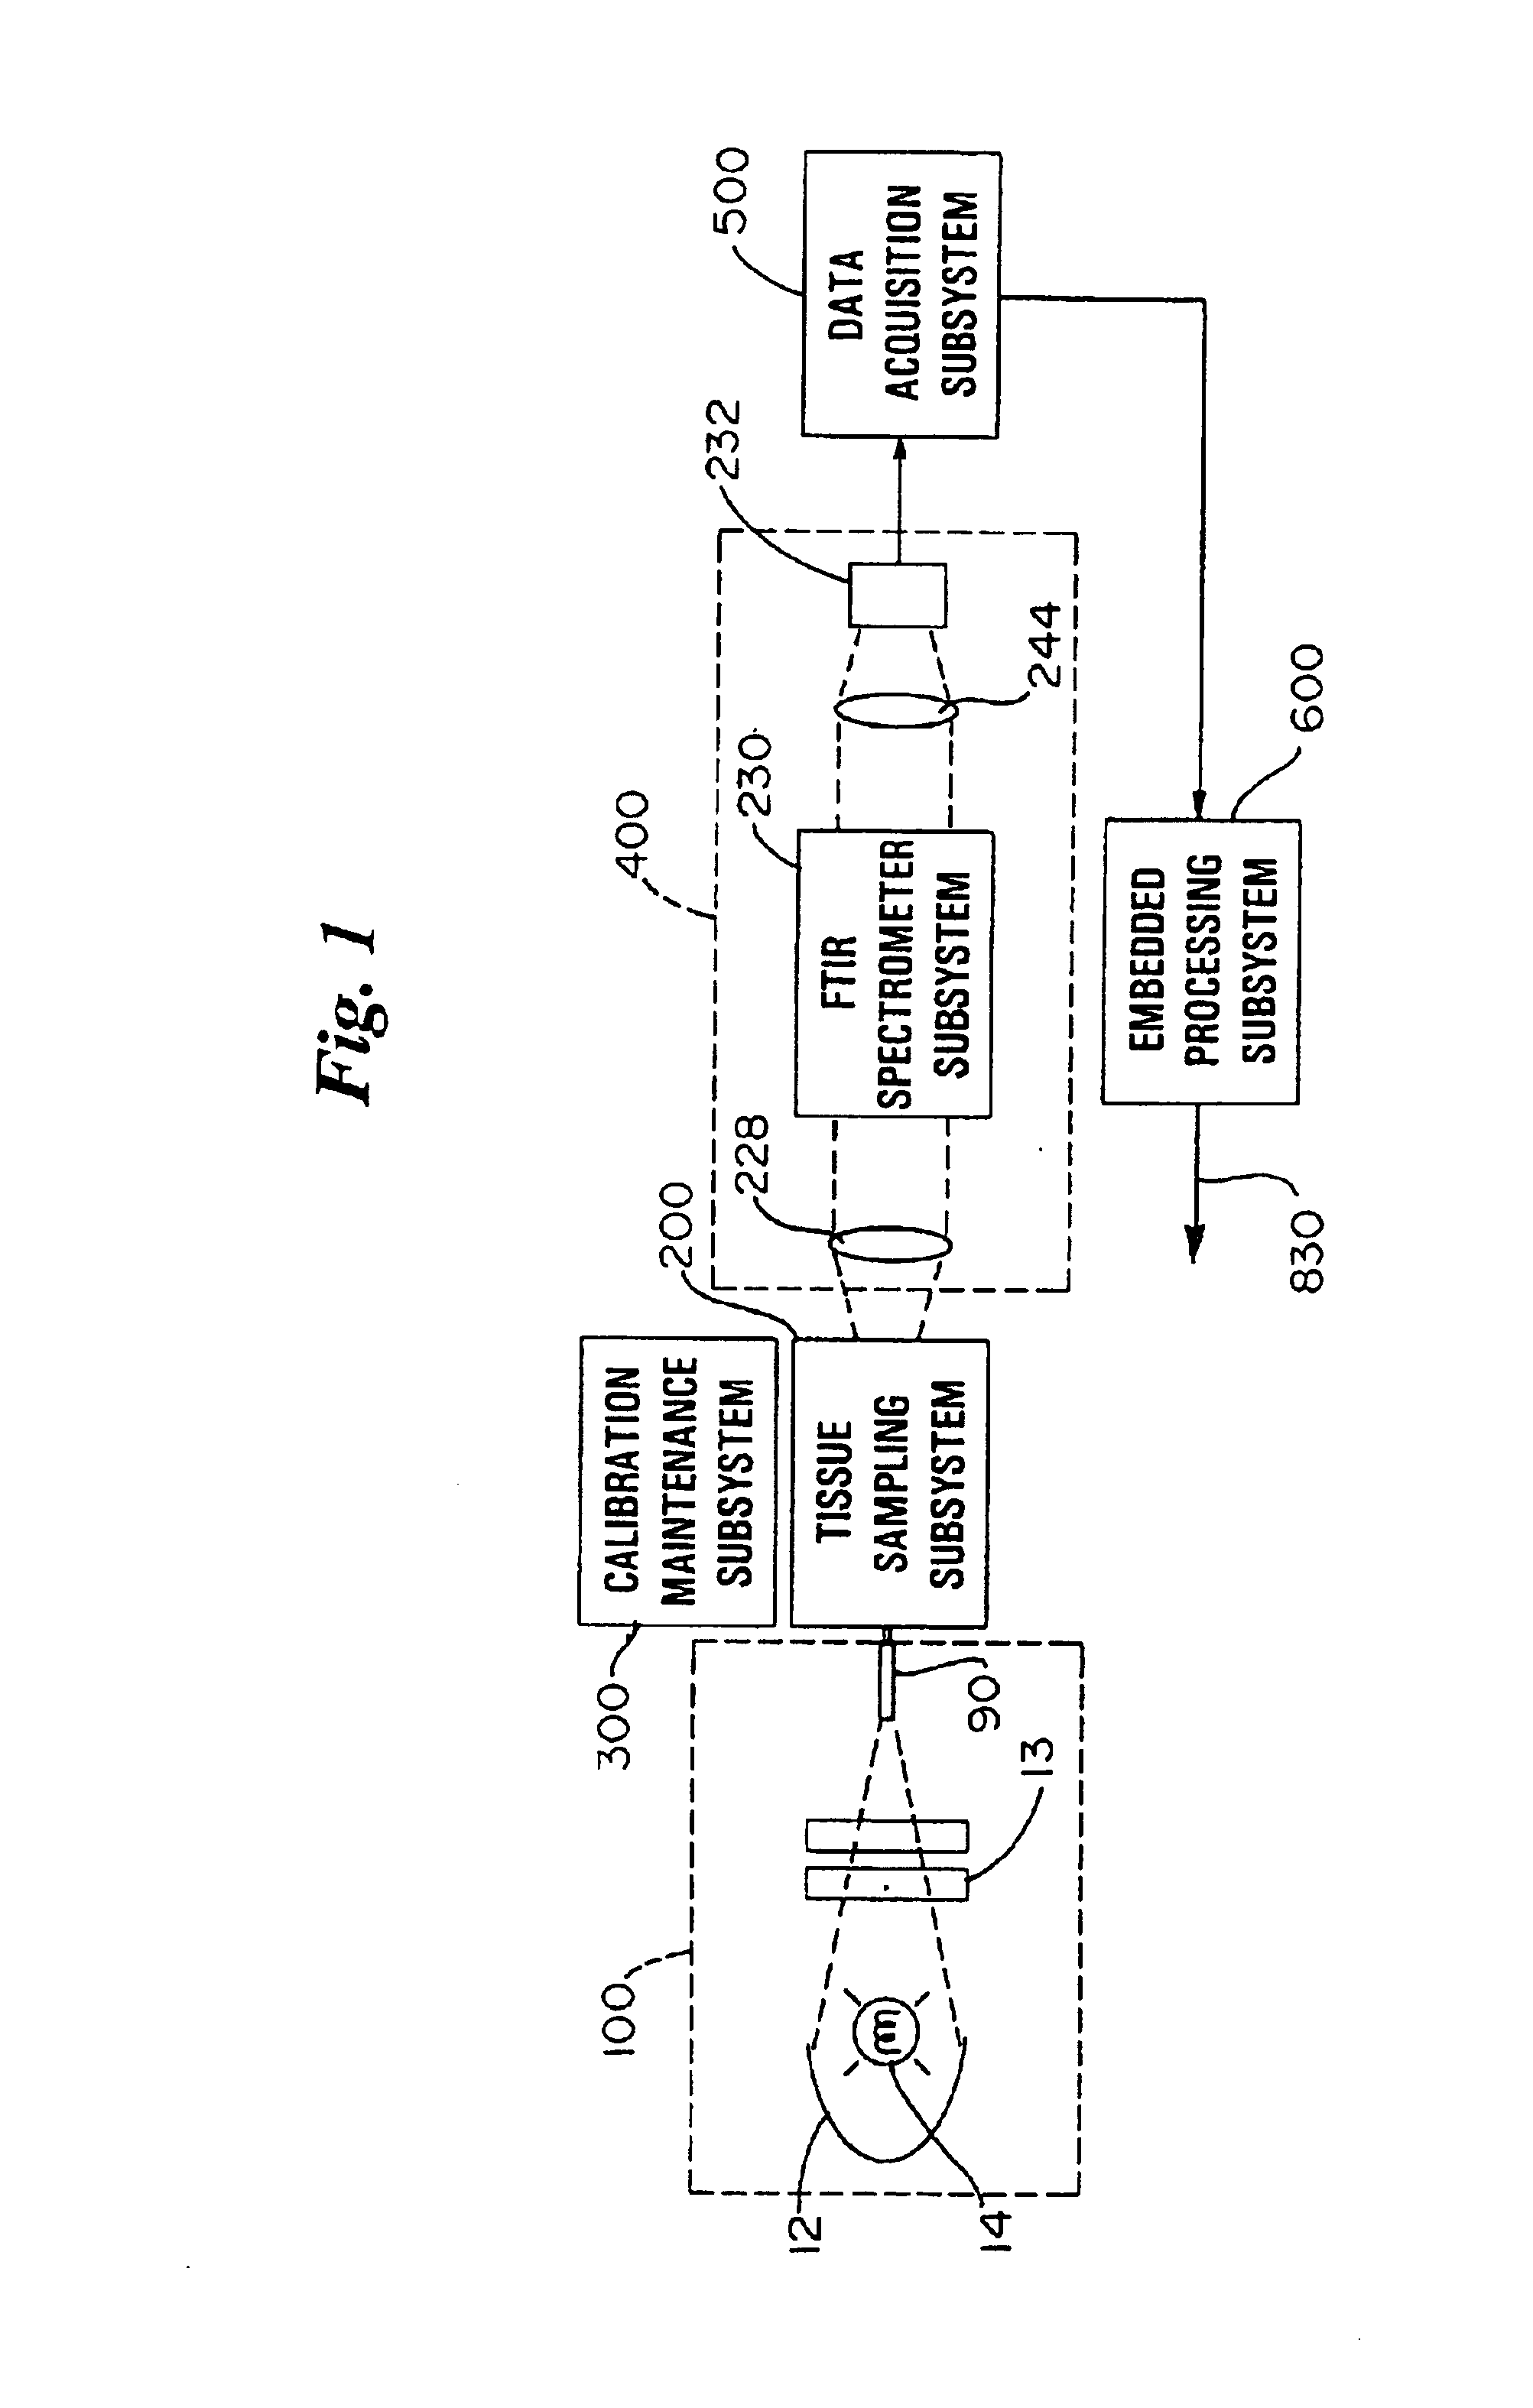 System for non-invasive measurement of glucose in humans